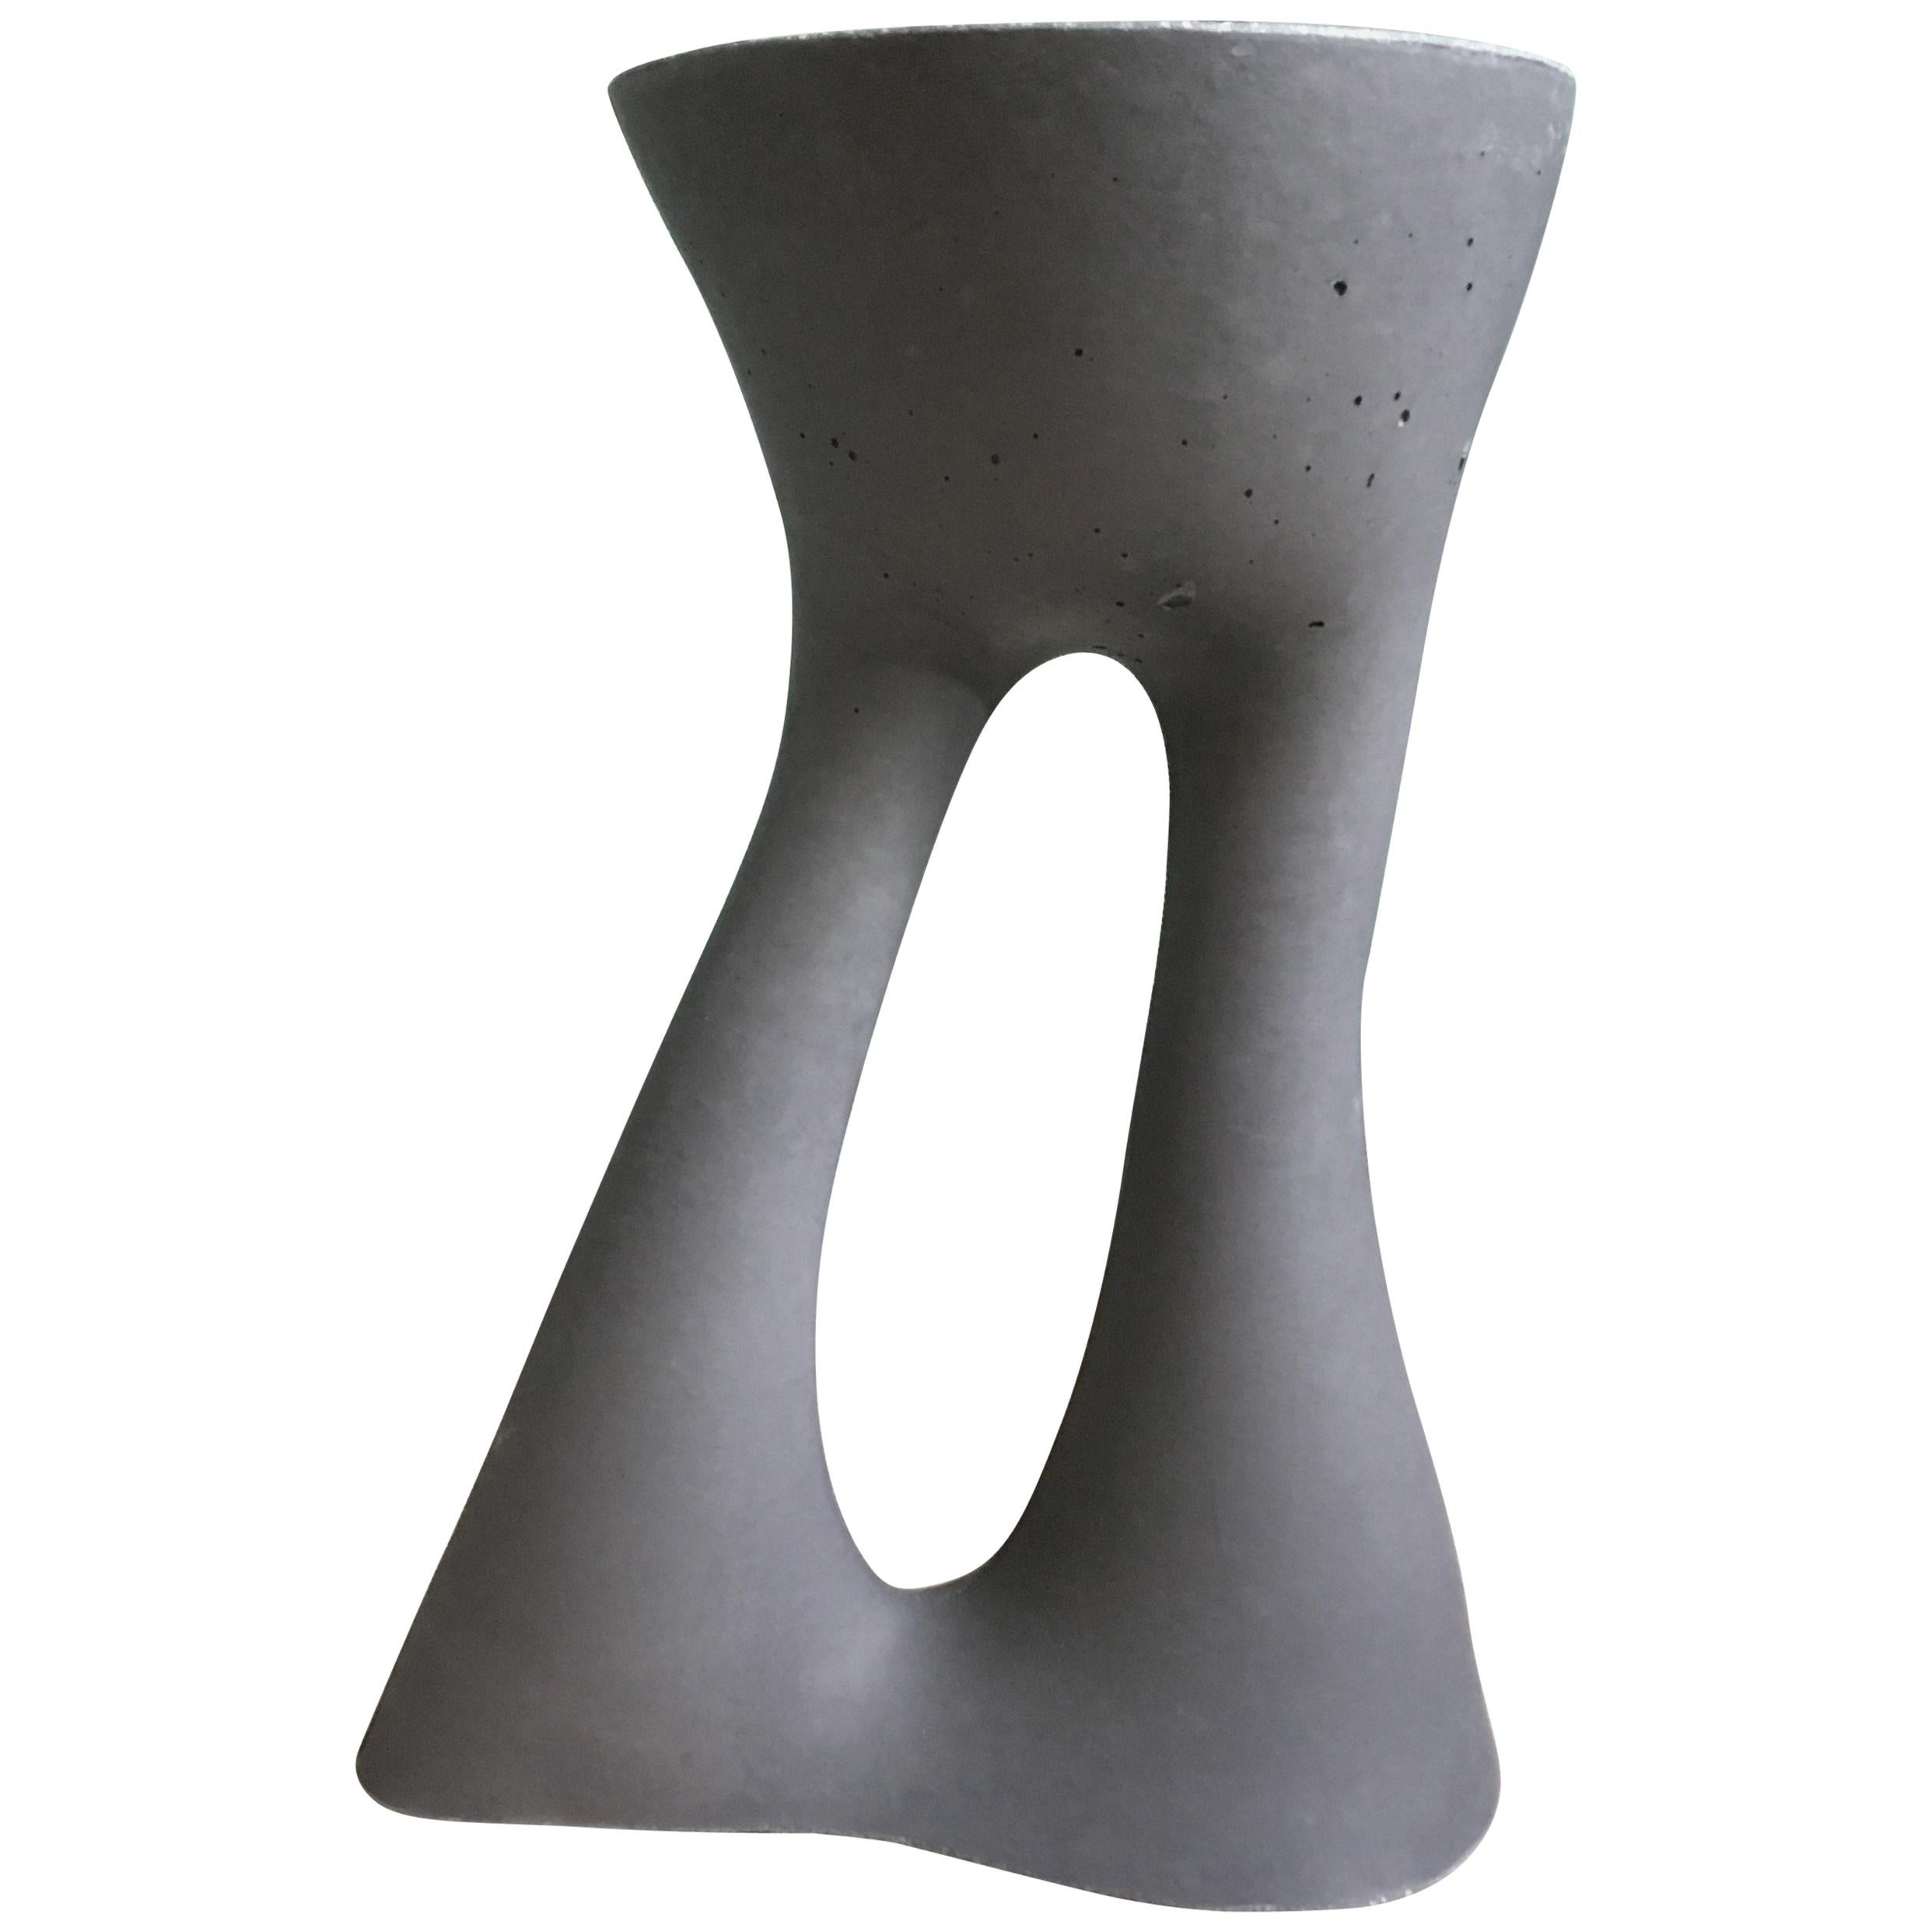 Tall Charcoal Kreten Side Table from Souda, Factory 2nd